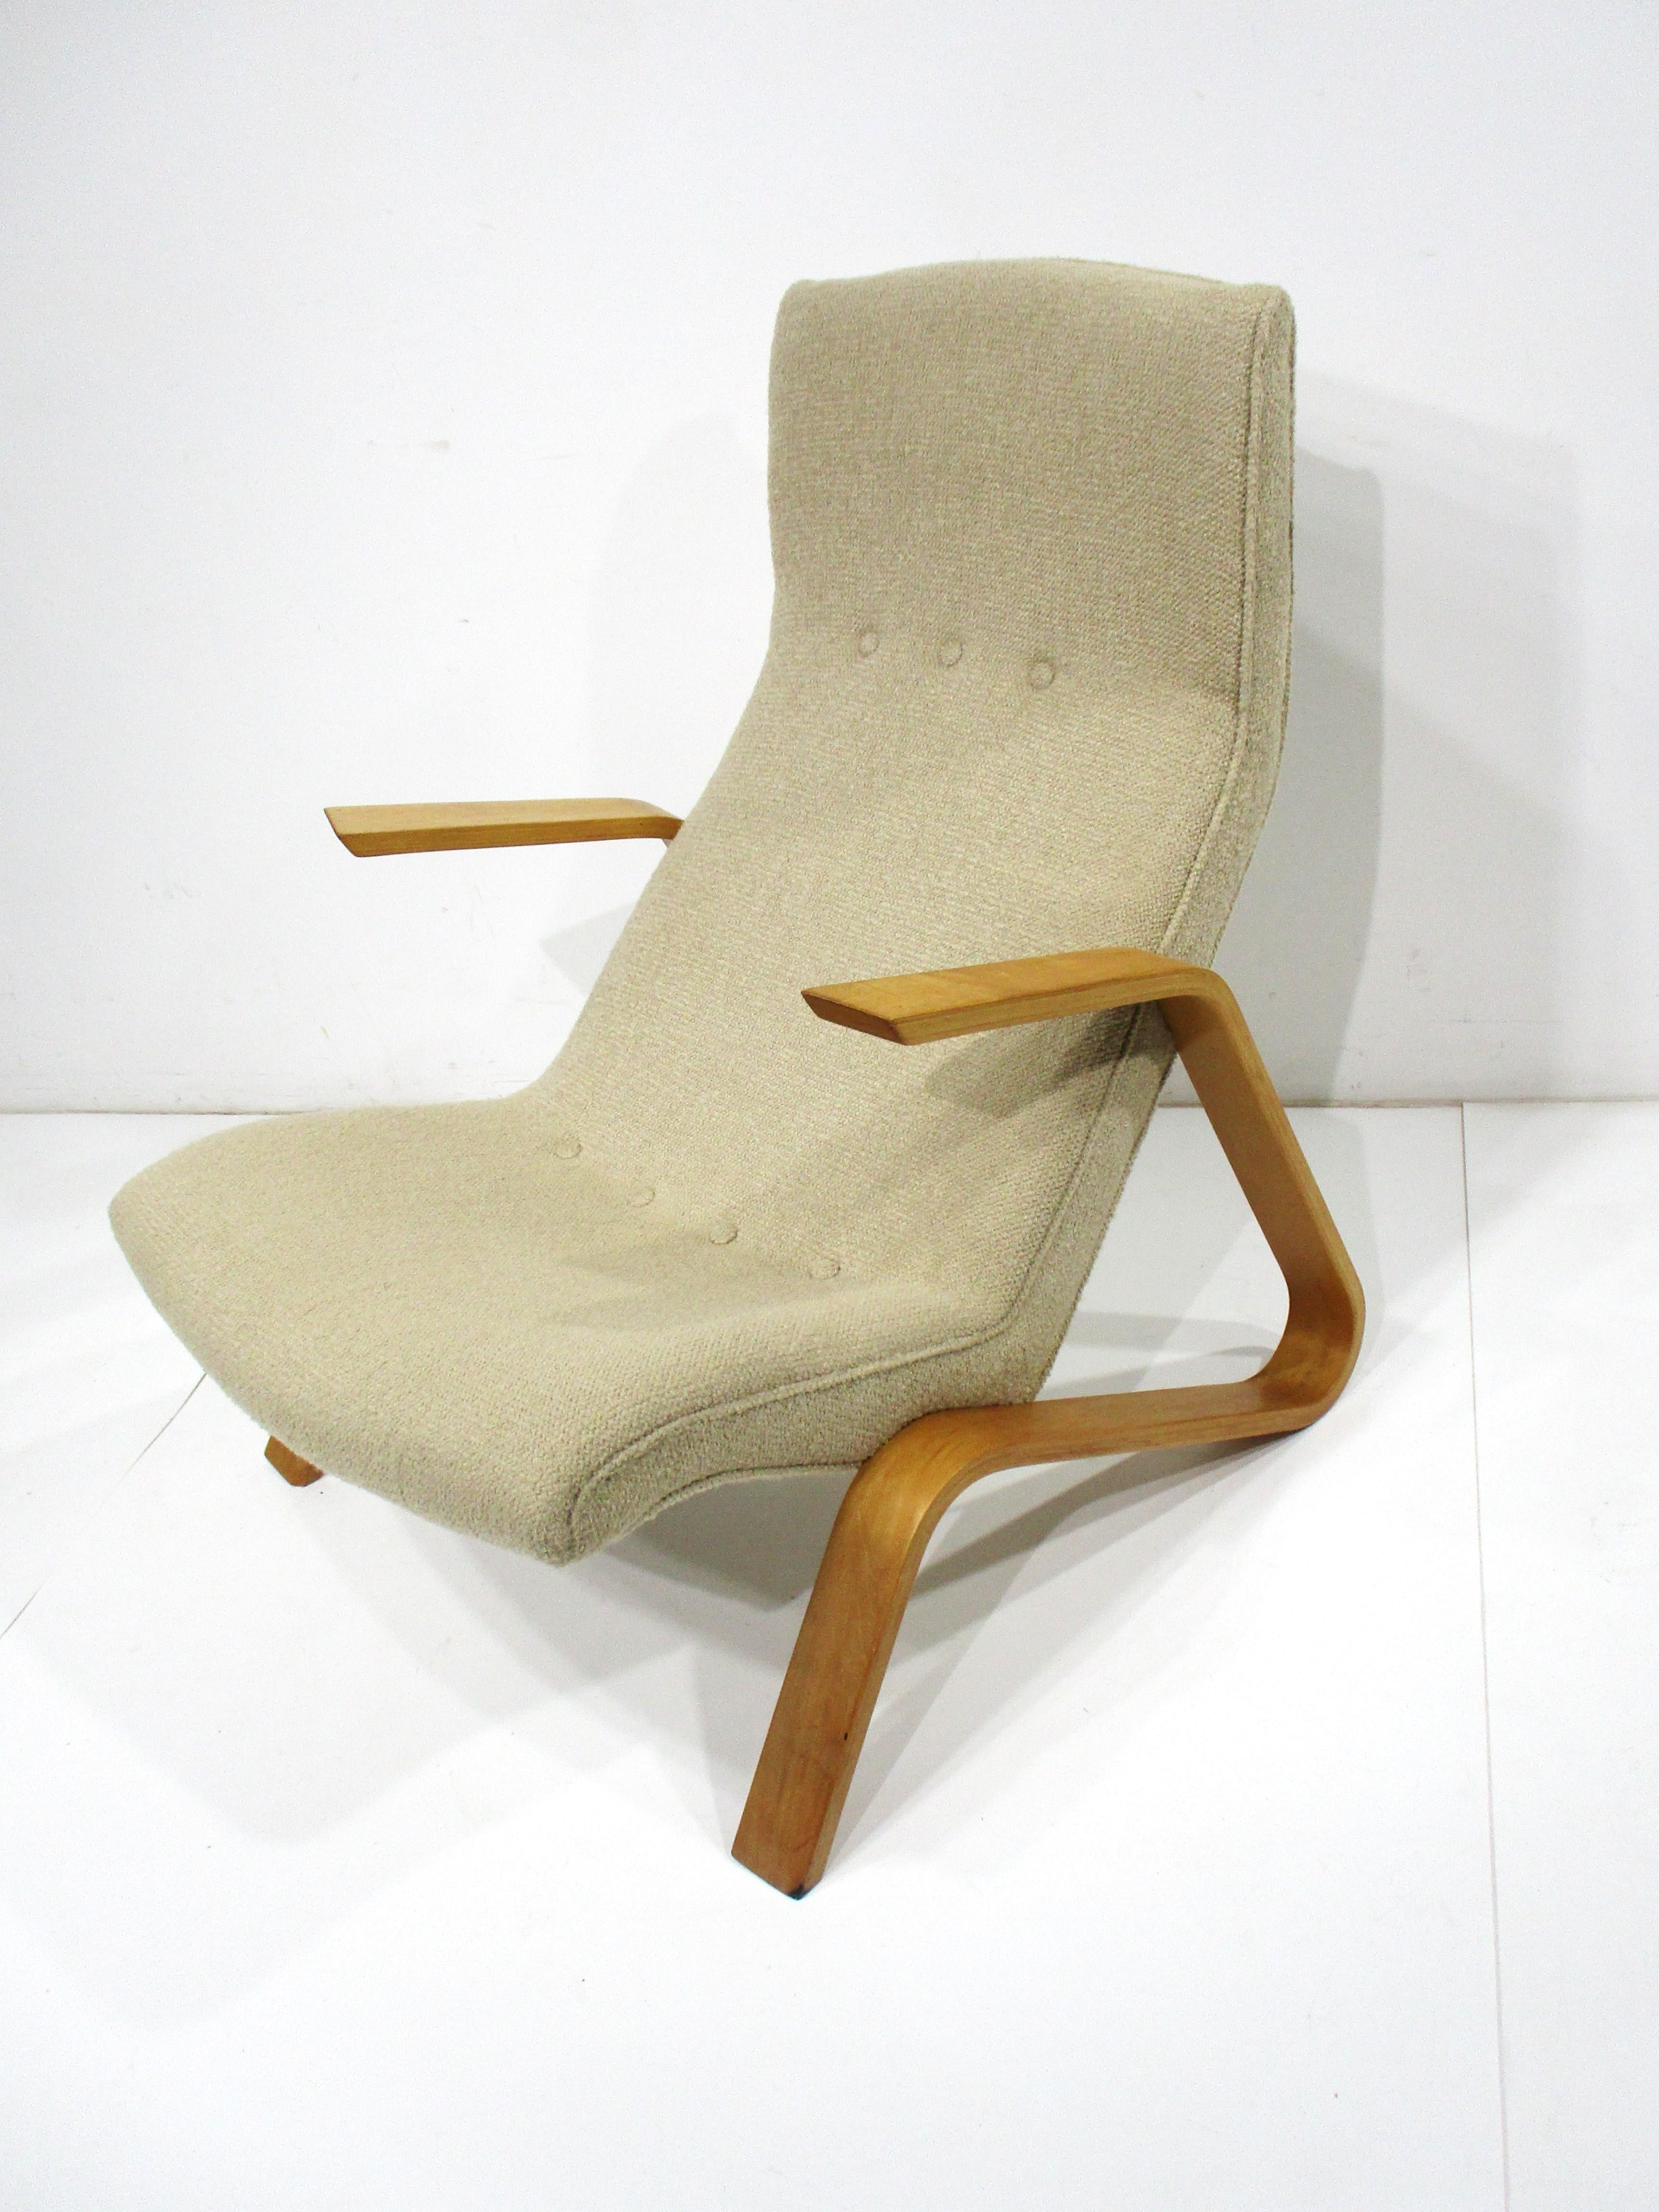 Early Eero Saarinen Grasshopper Lounge Chair for Knoll  For Sale 2